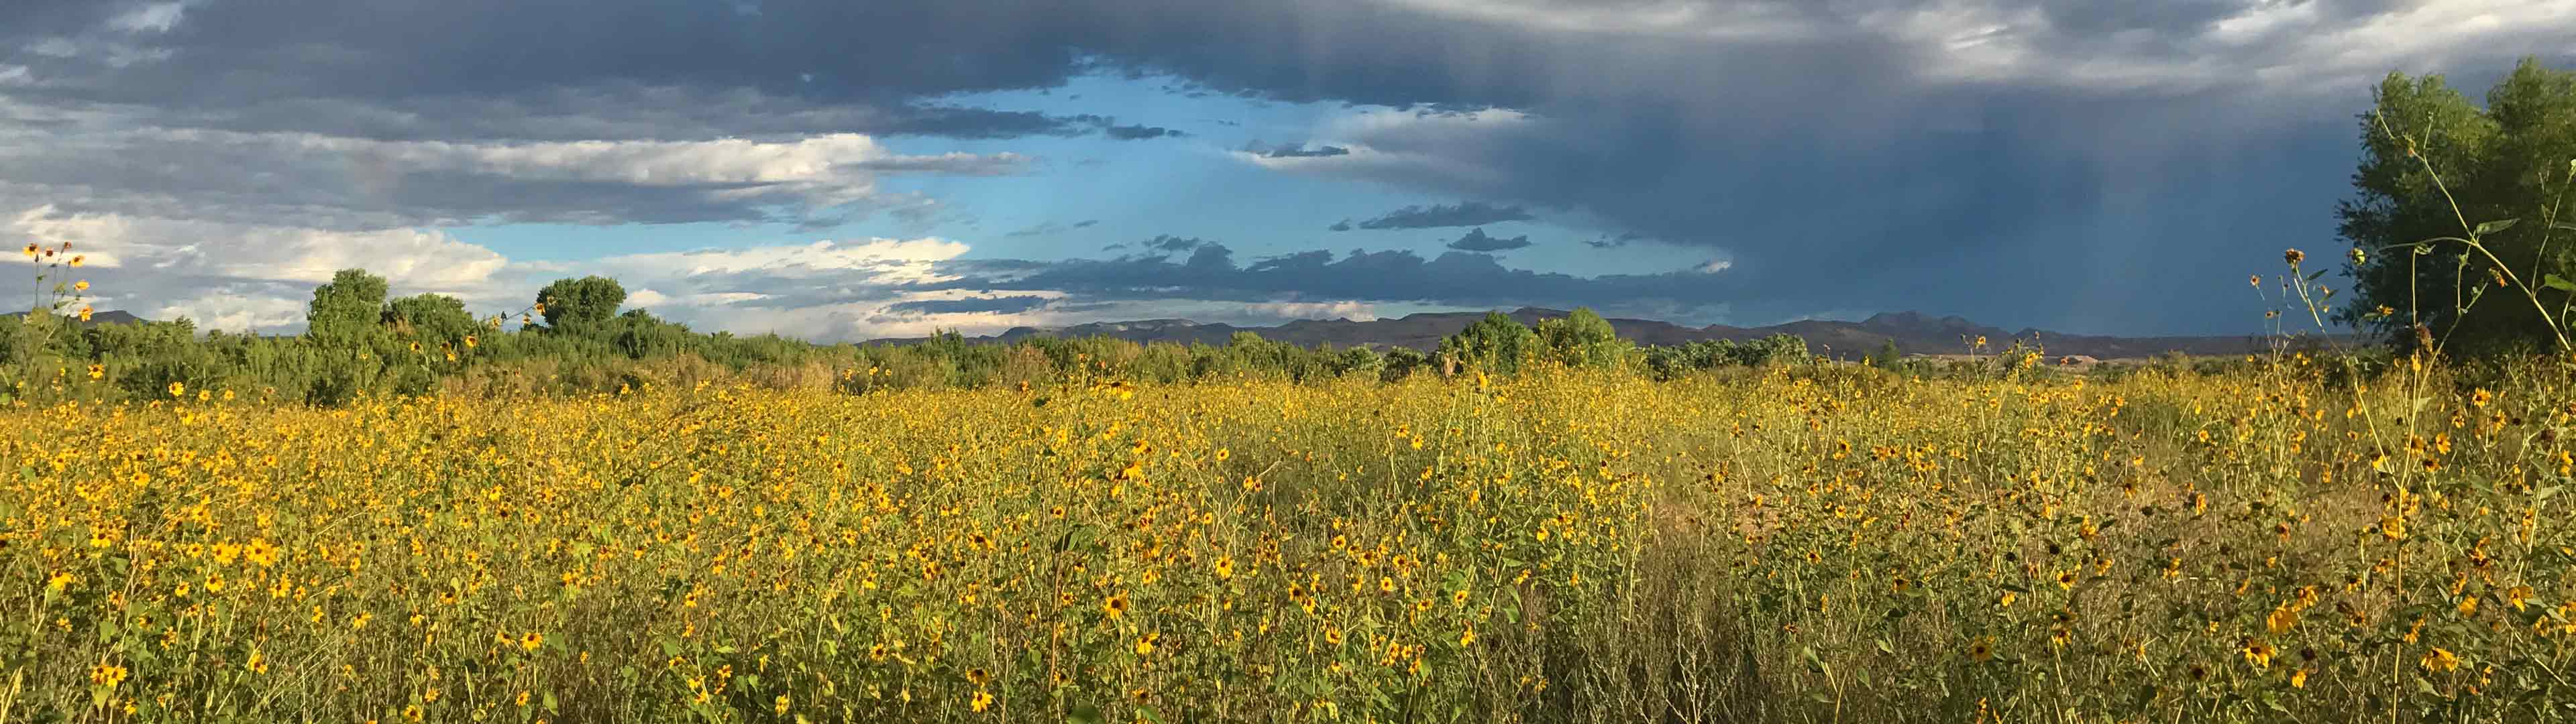 Field of wildflowers against dramatic sky at Warm Springs Natural Area